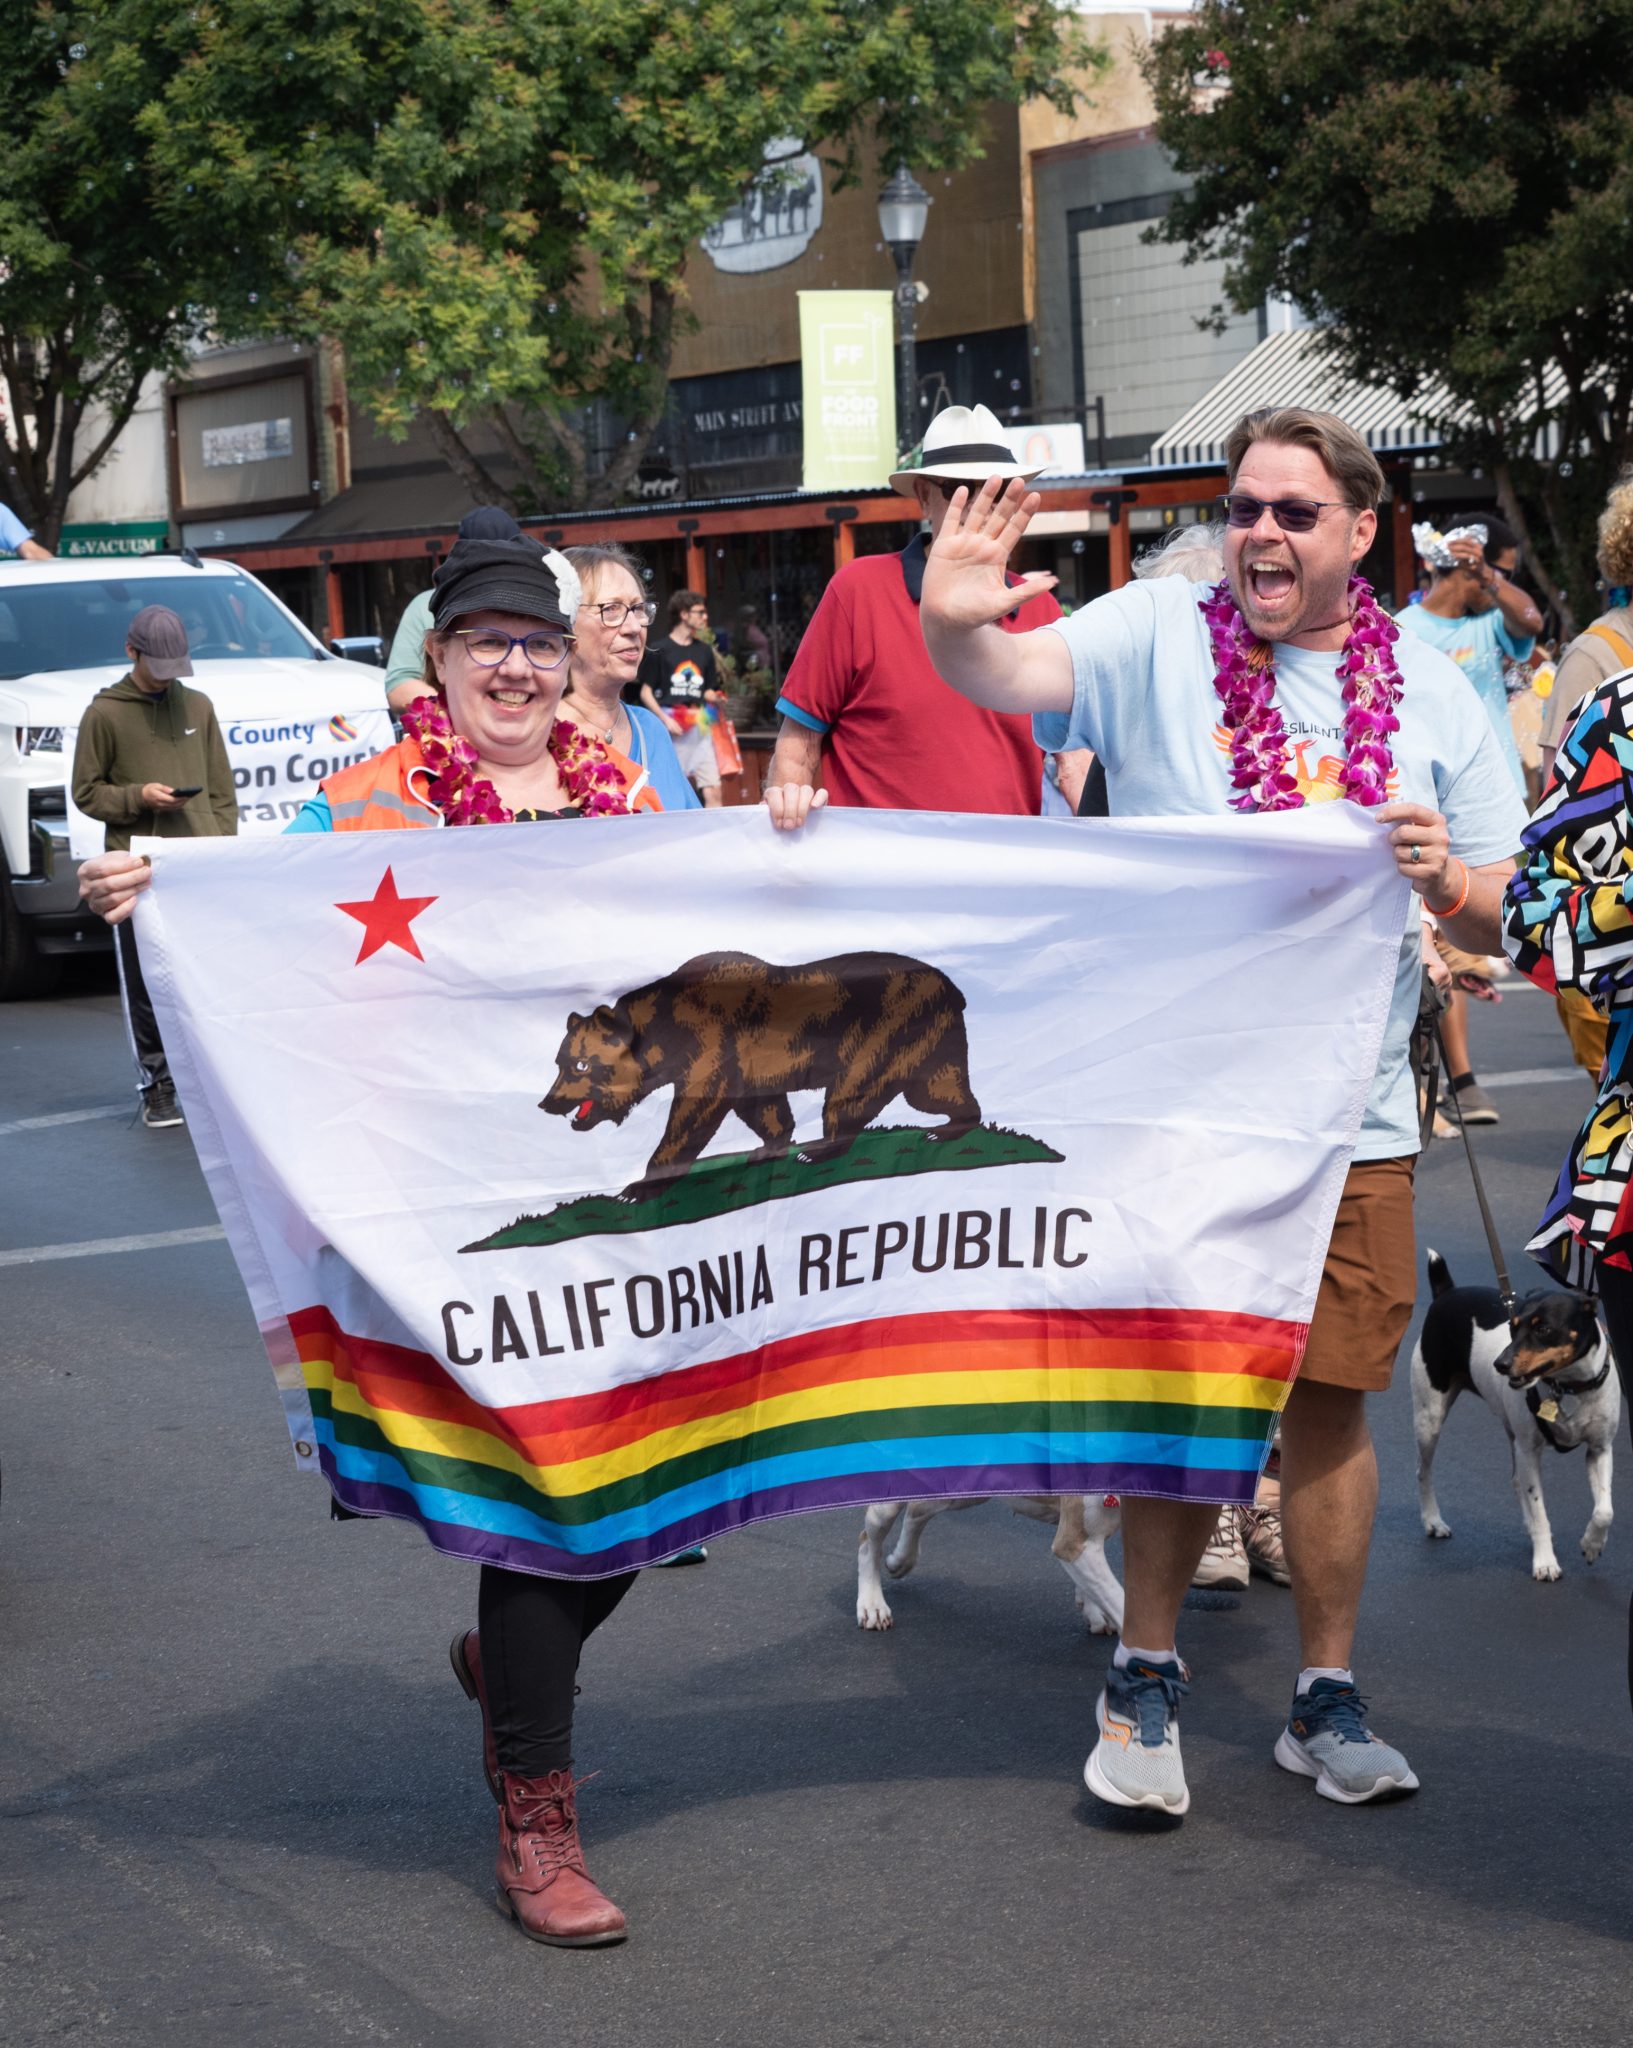 reporter, news event, small town, central valley, colorful photos, photography, photographs, Woodland California, Woodland, Yolo County, Pride parade, pride march, downtown, june 2023, chris allan, lgbtq, community, event, photojournalist